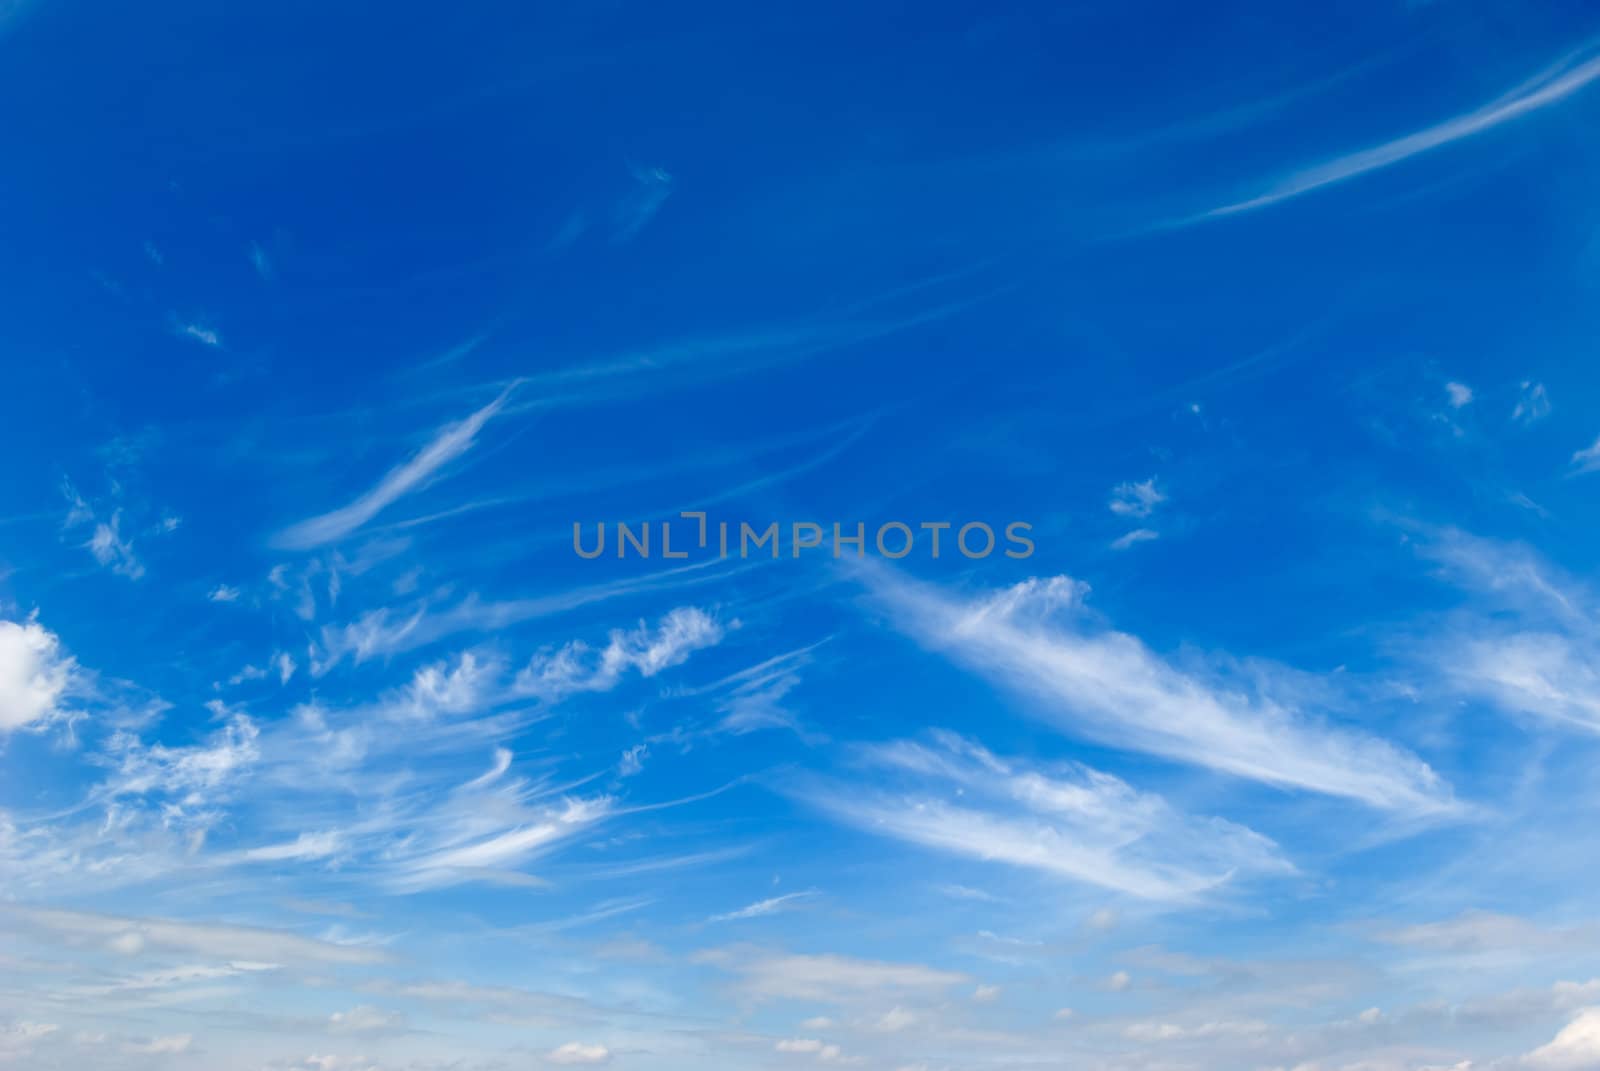 White clouds are photographed on a background of the blue sky